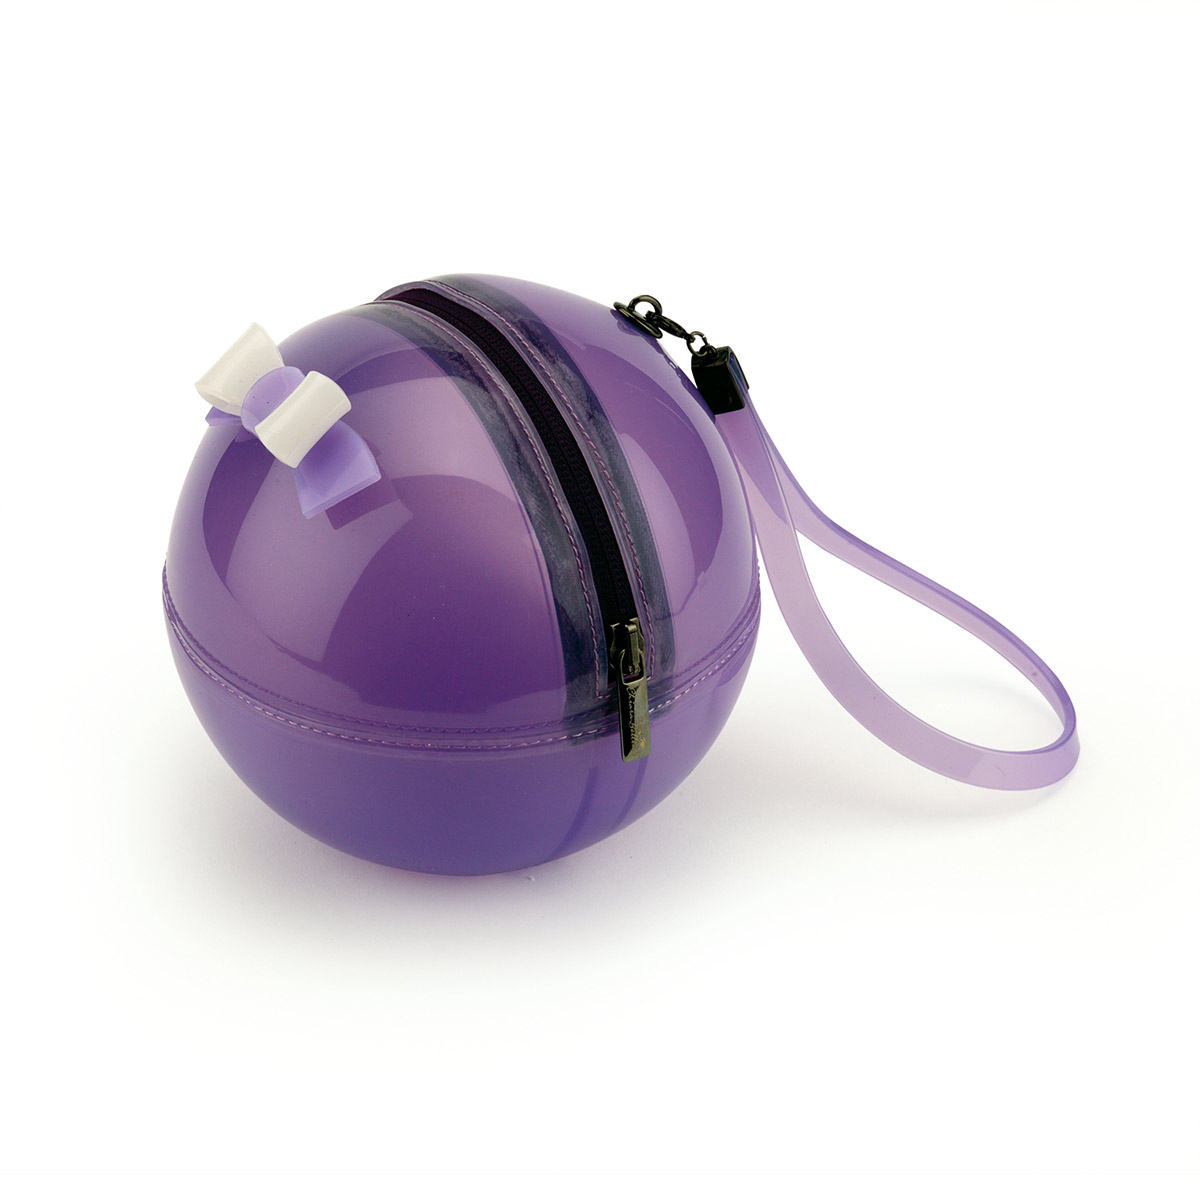 Pvc Sphere Bag with bow shaped accessory